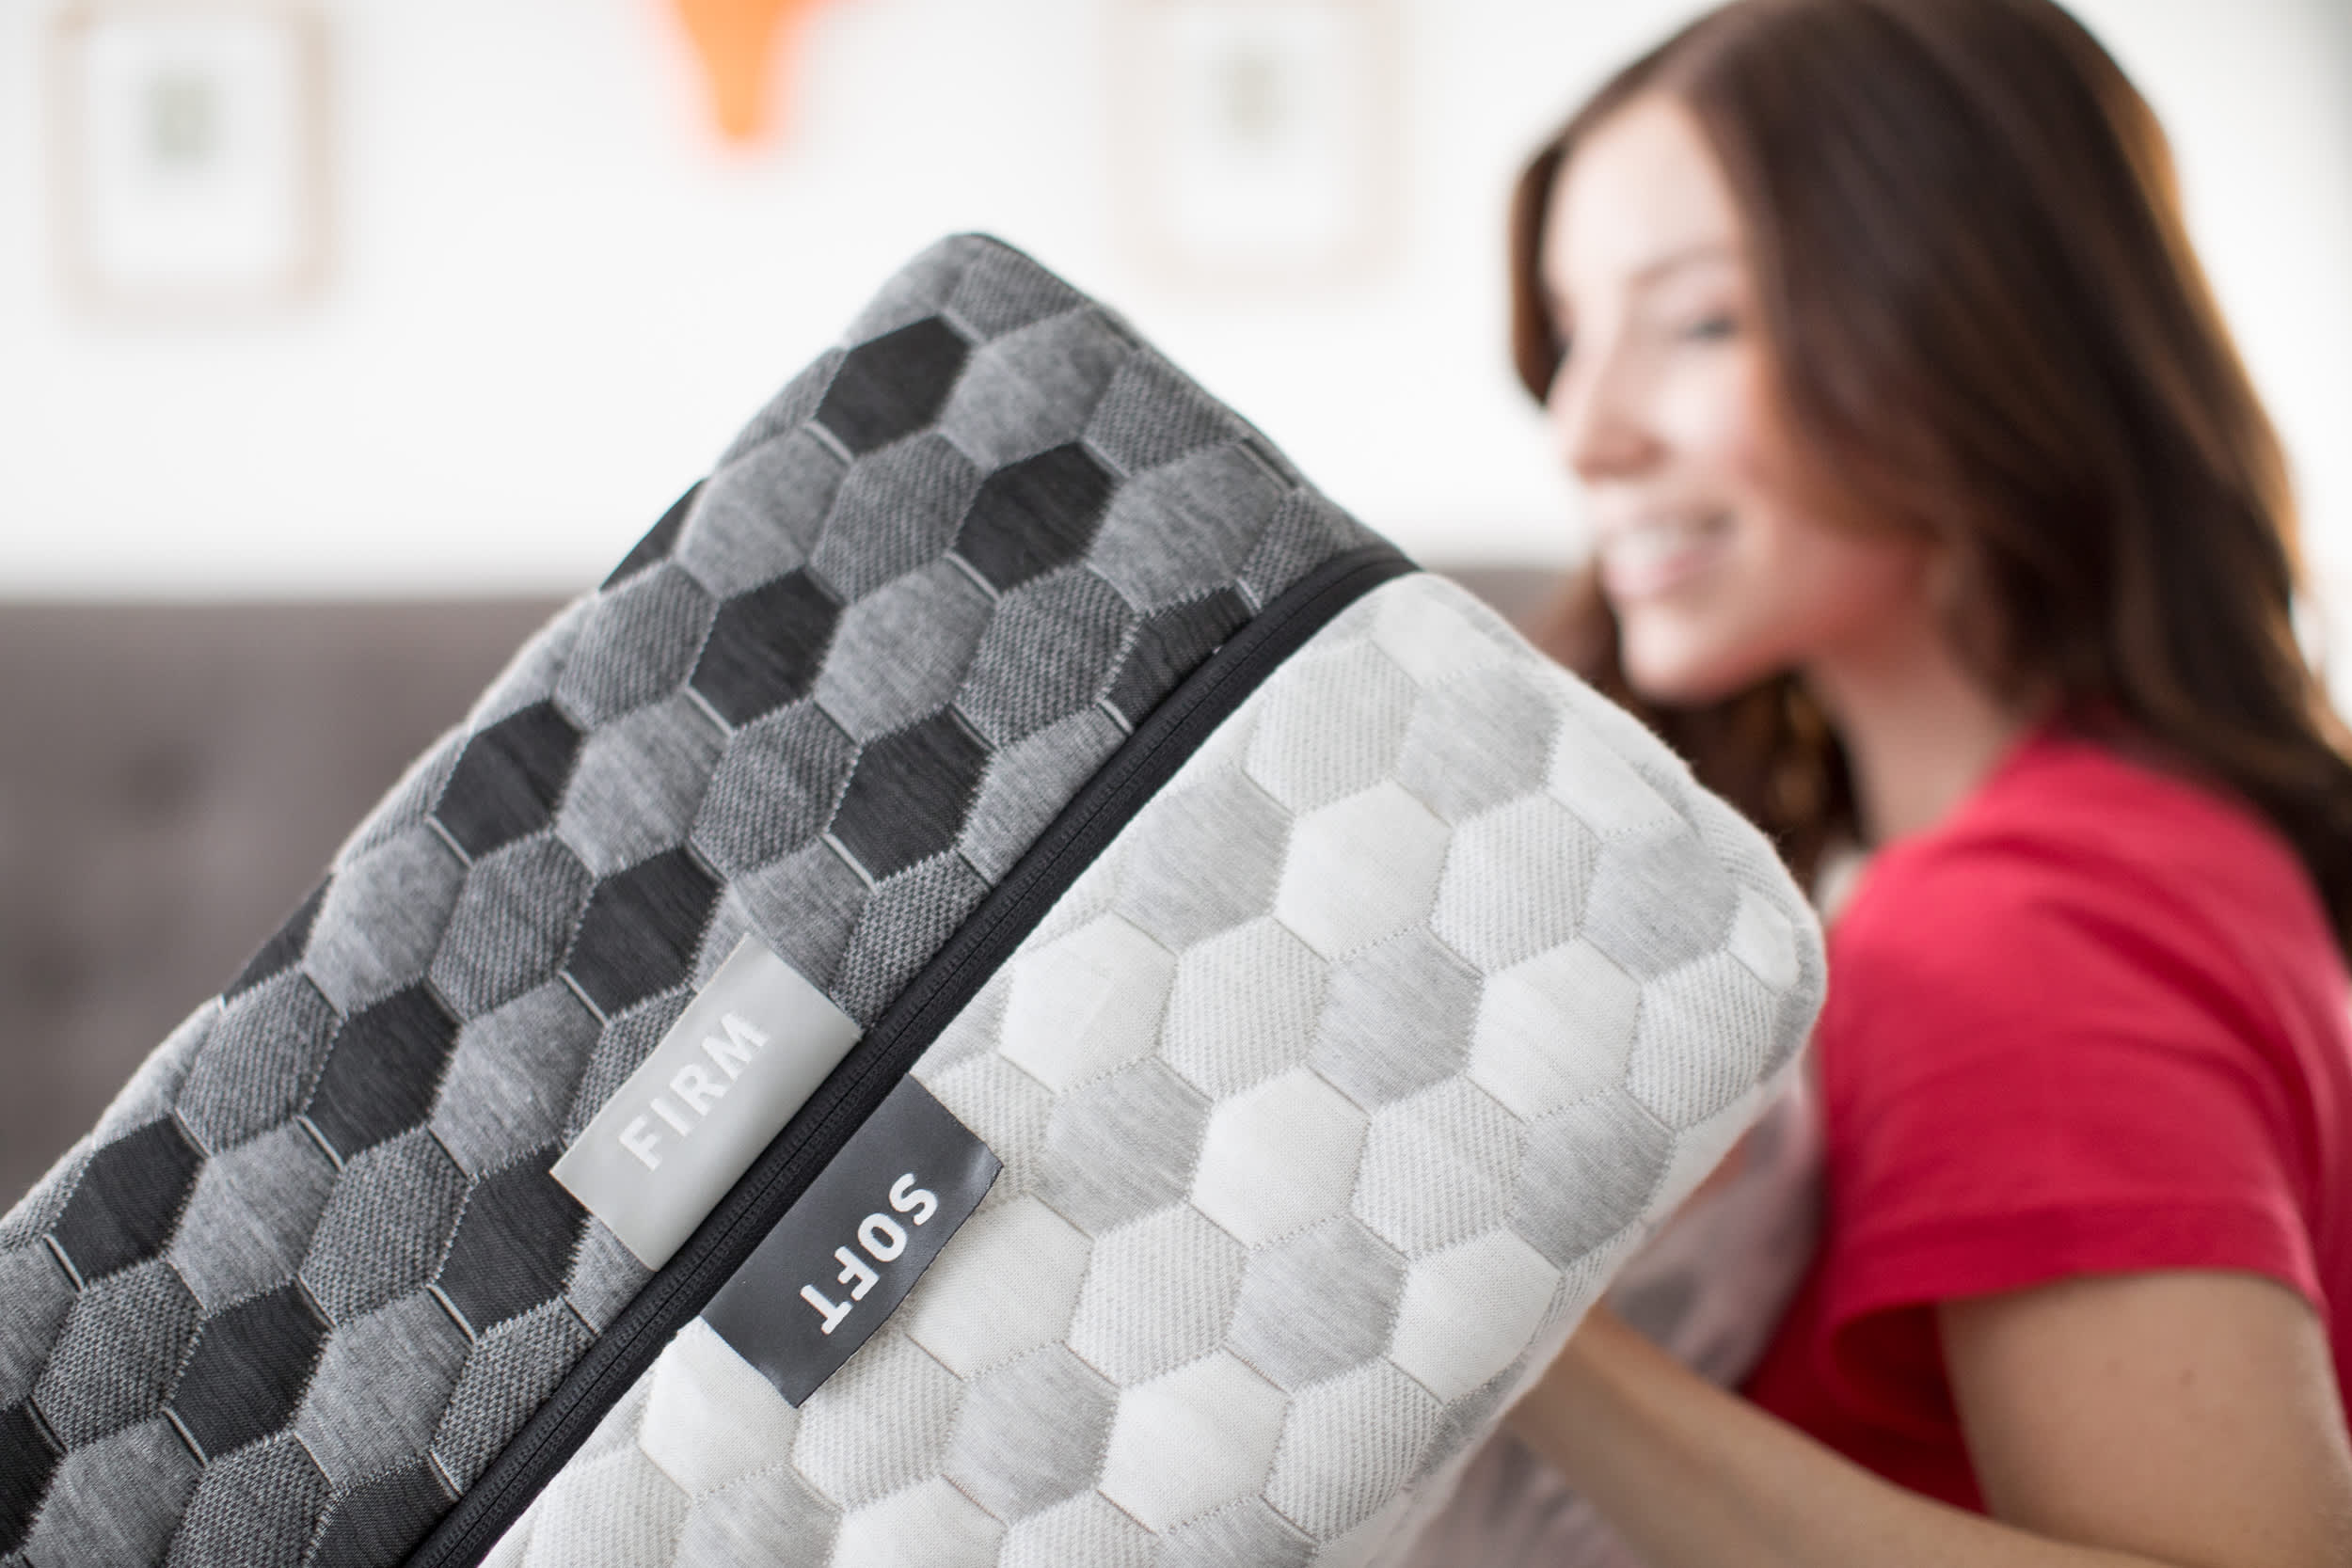 Layla Pillow Review - Honest Layla Pillow Review (January 2024)